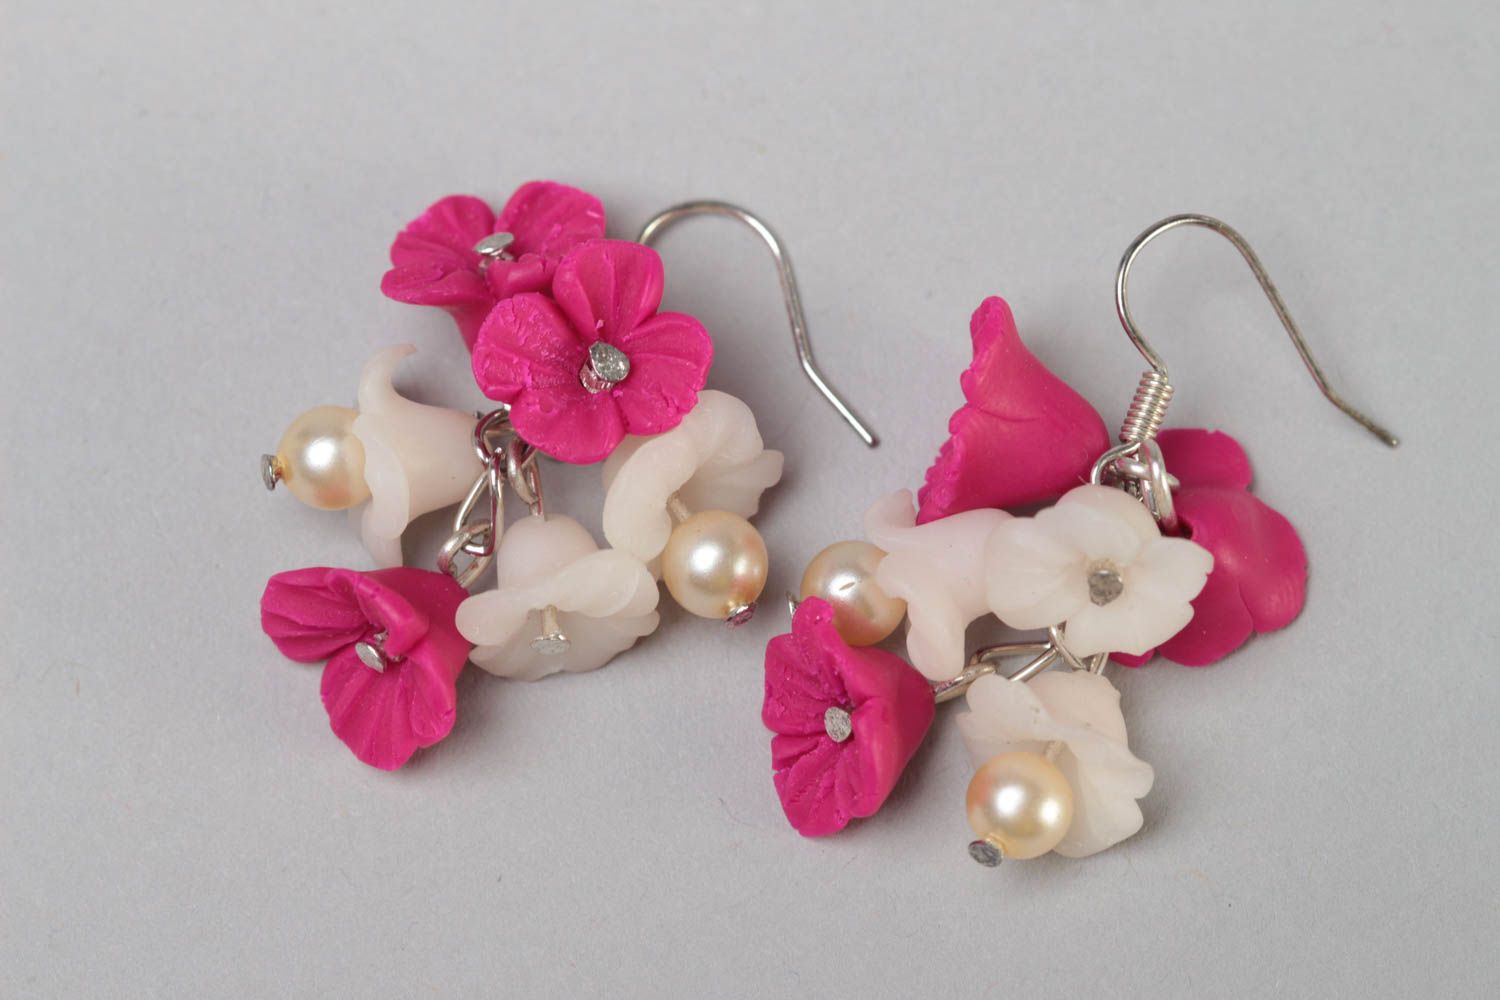 Handmade designer polymer clay floral dangling earrings in pink and milk colors photo 2